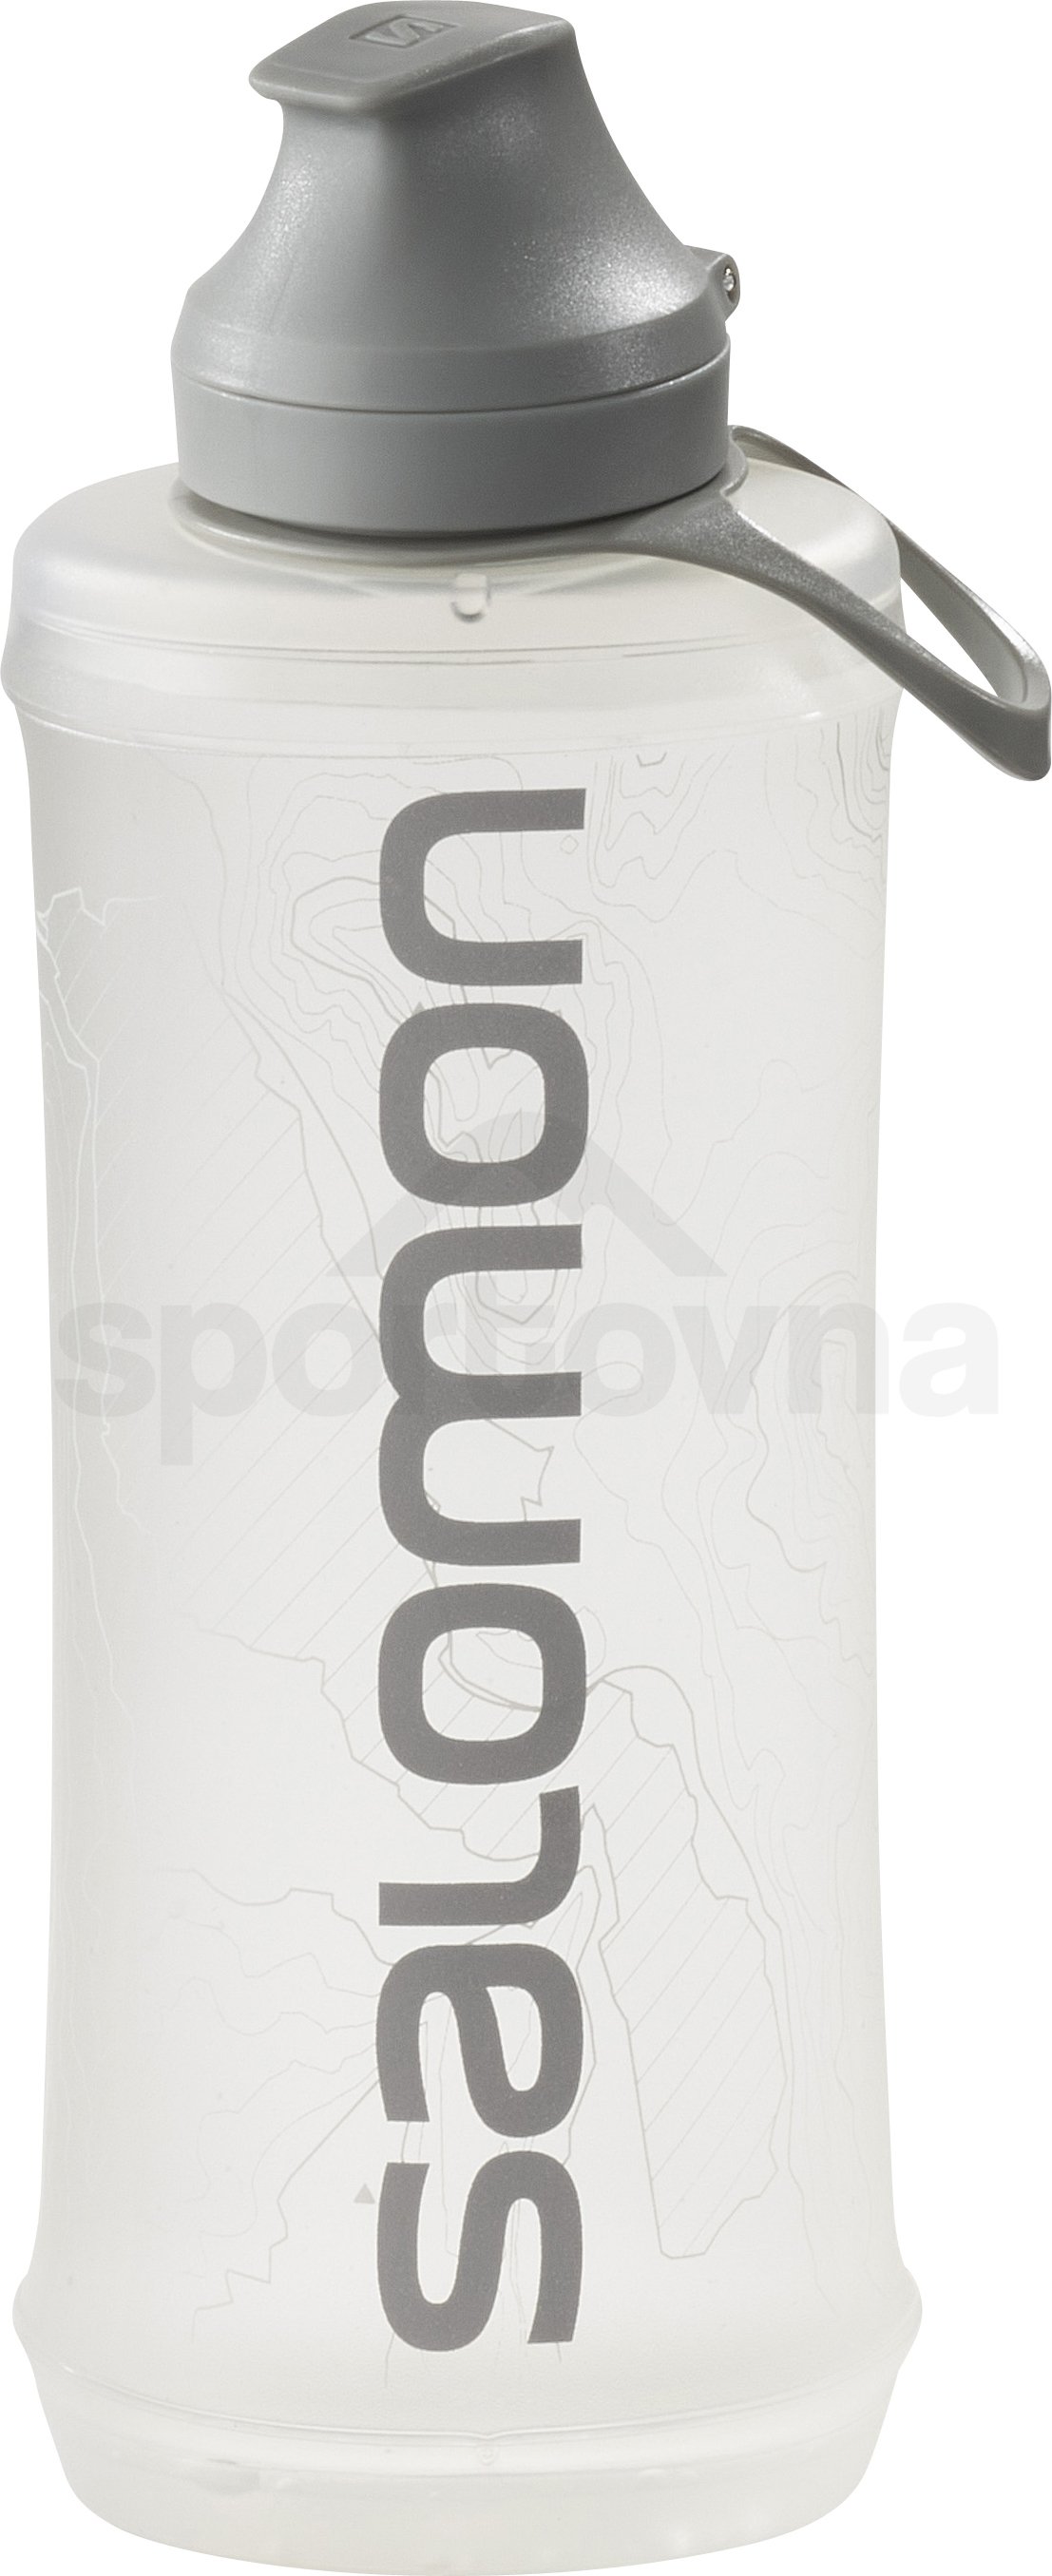 LC1636700_0_GHO_S OUTLIFE BOTTLE 550ml18oz Clear map.jpg.cq5dam.web.2711.1107